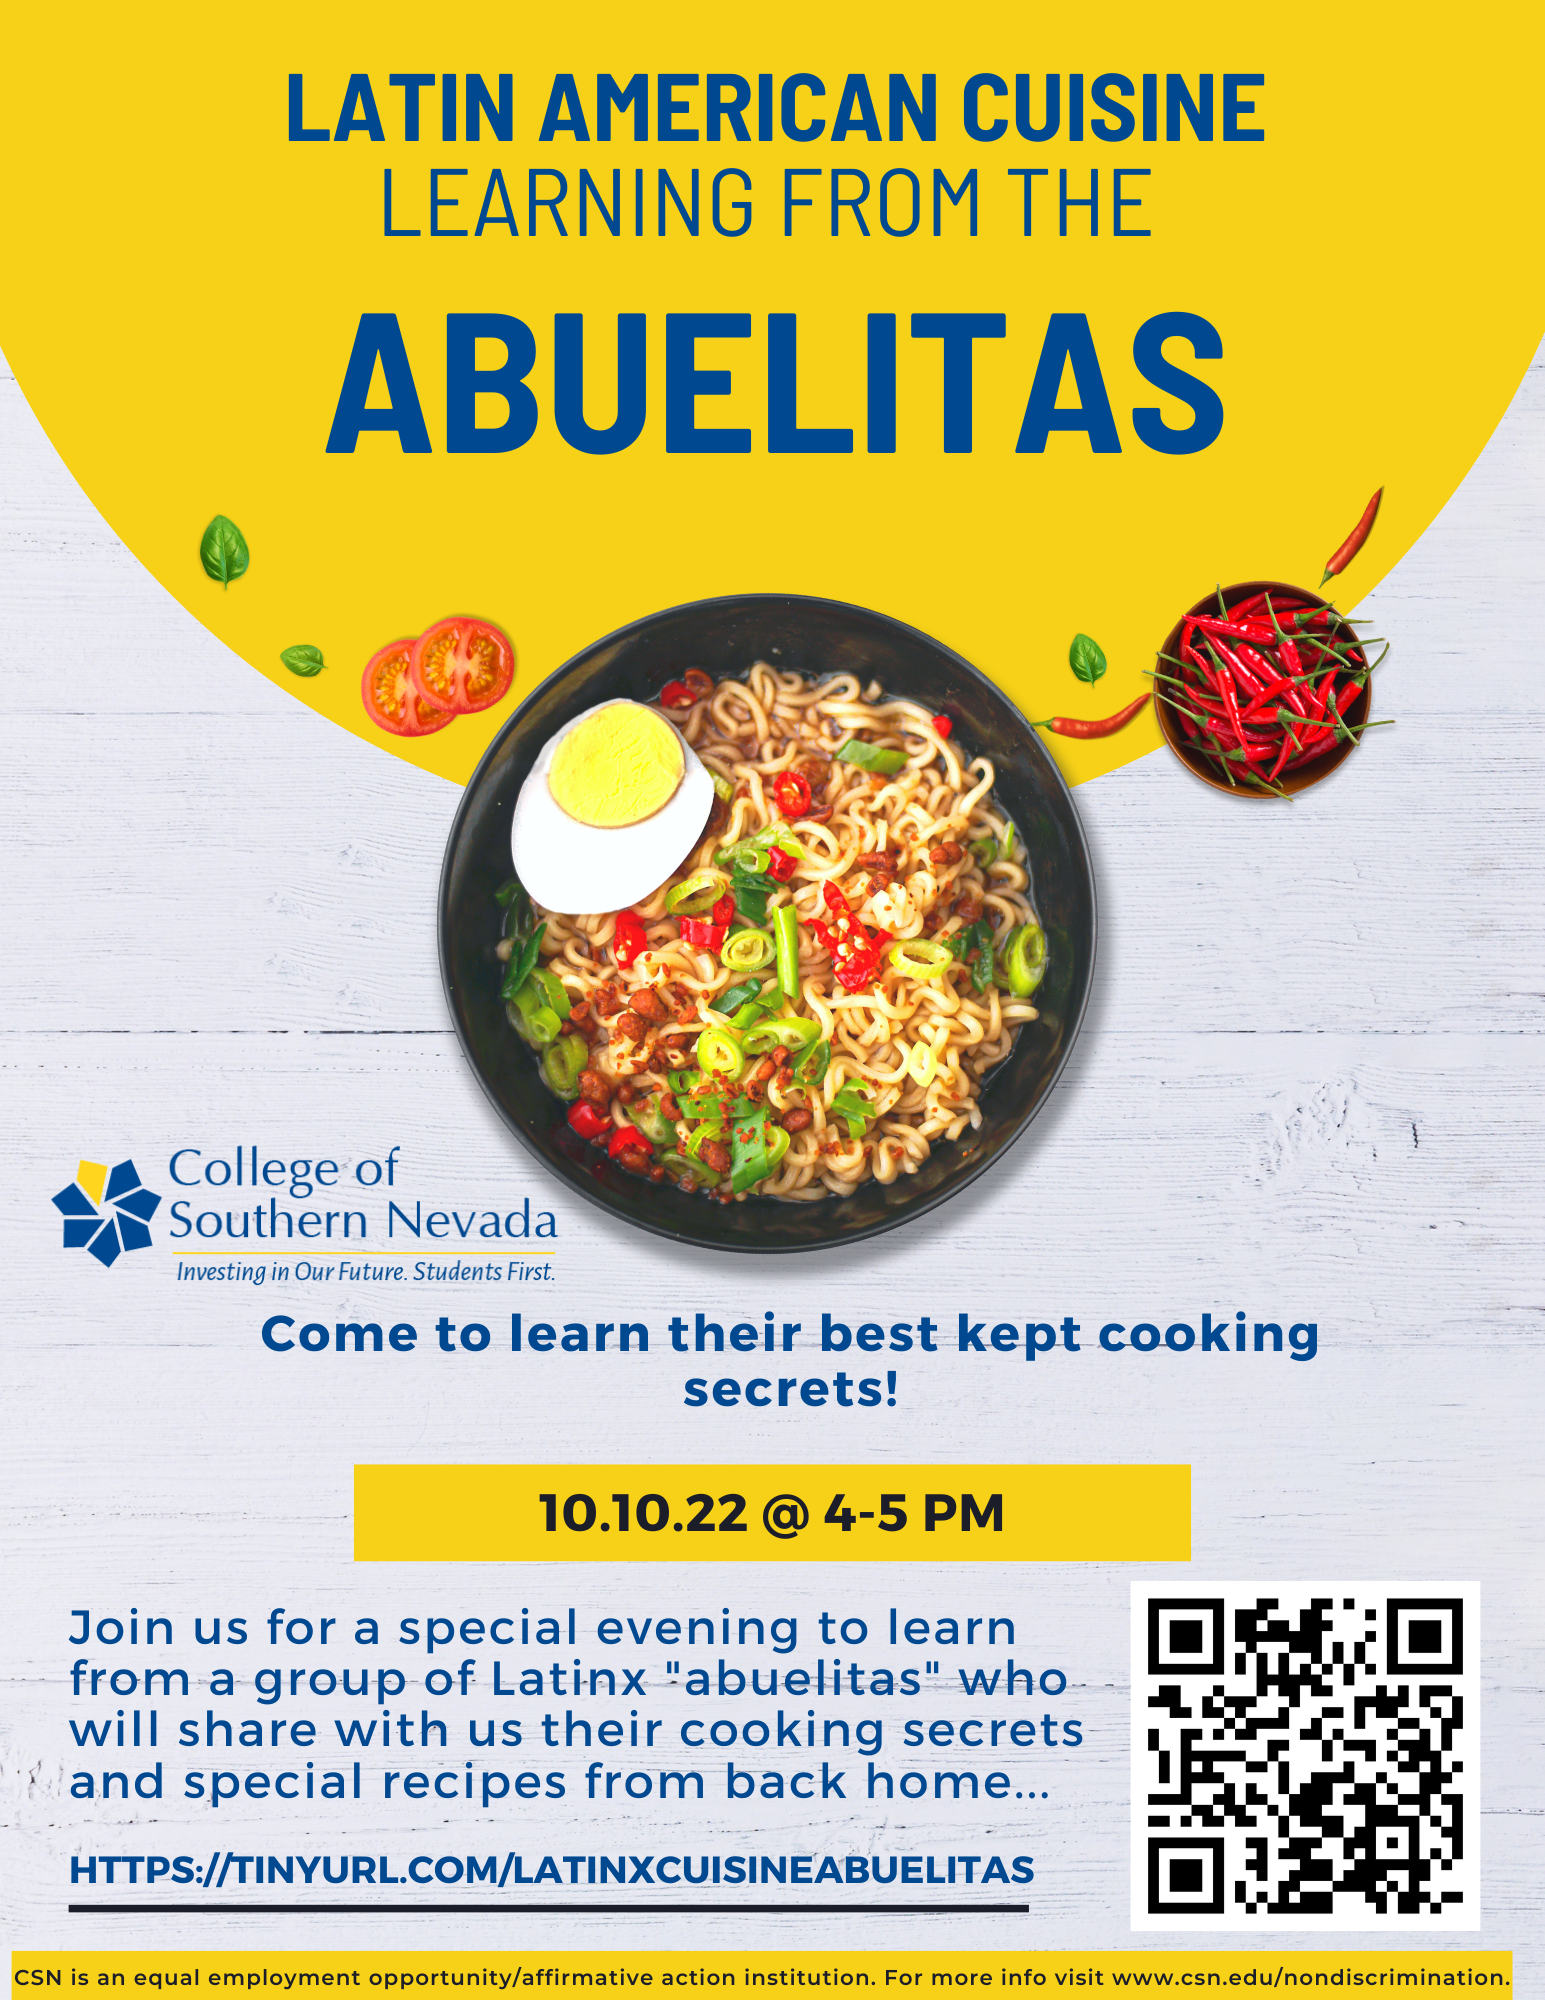 Latin American Cuisine Learning From The Abuelitas on October 10, 2022